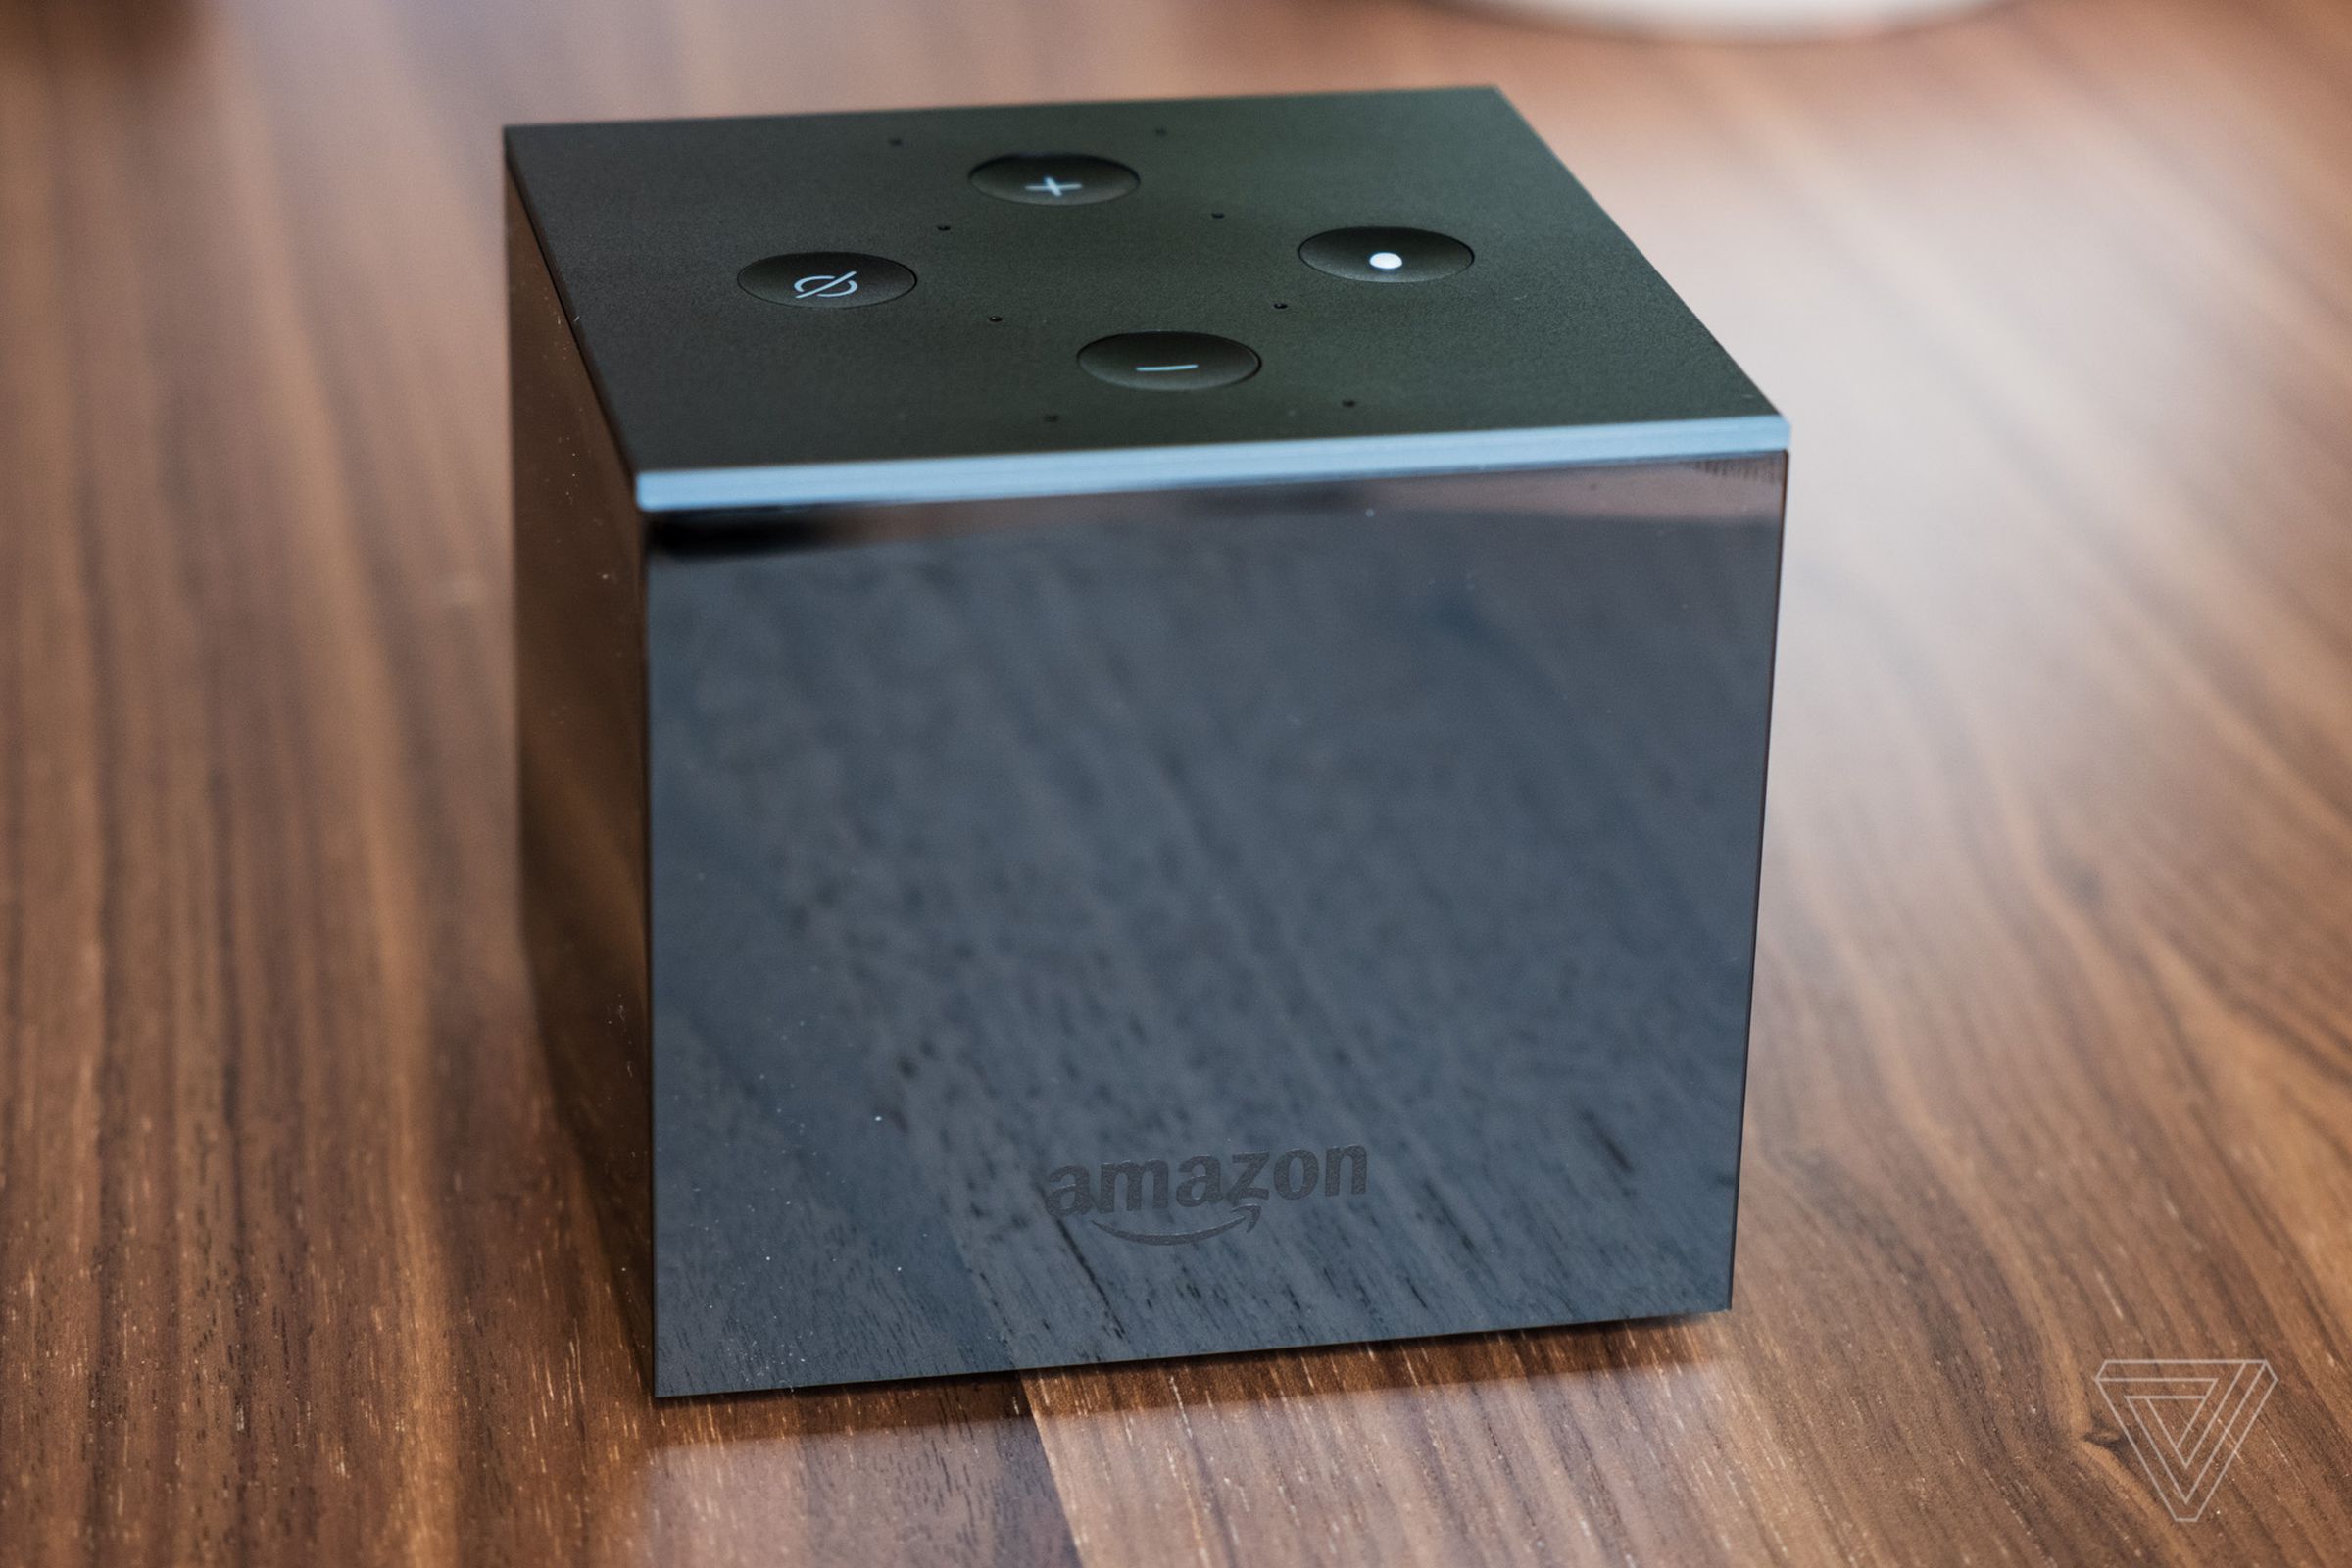 I’m not a fan of the glossy exterior, but Amazon says it helps with IR performance.